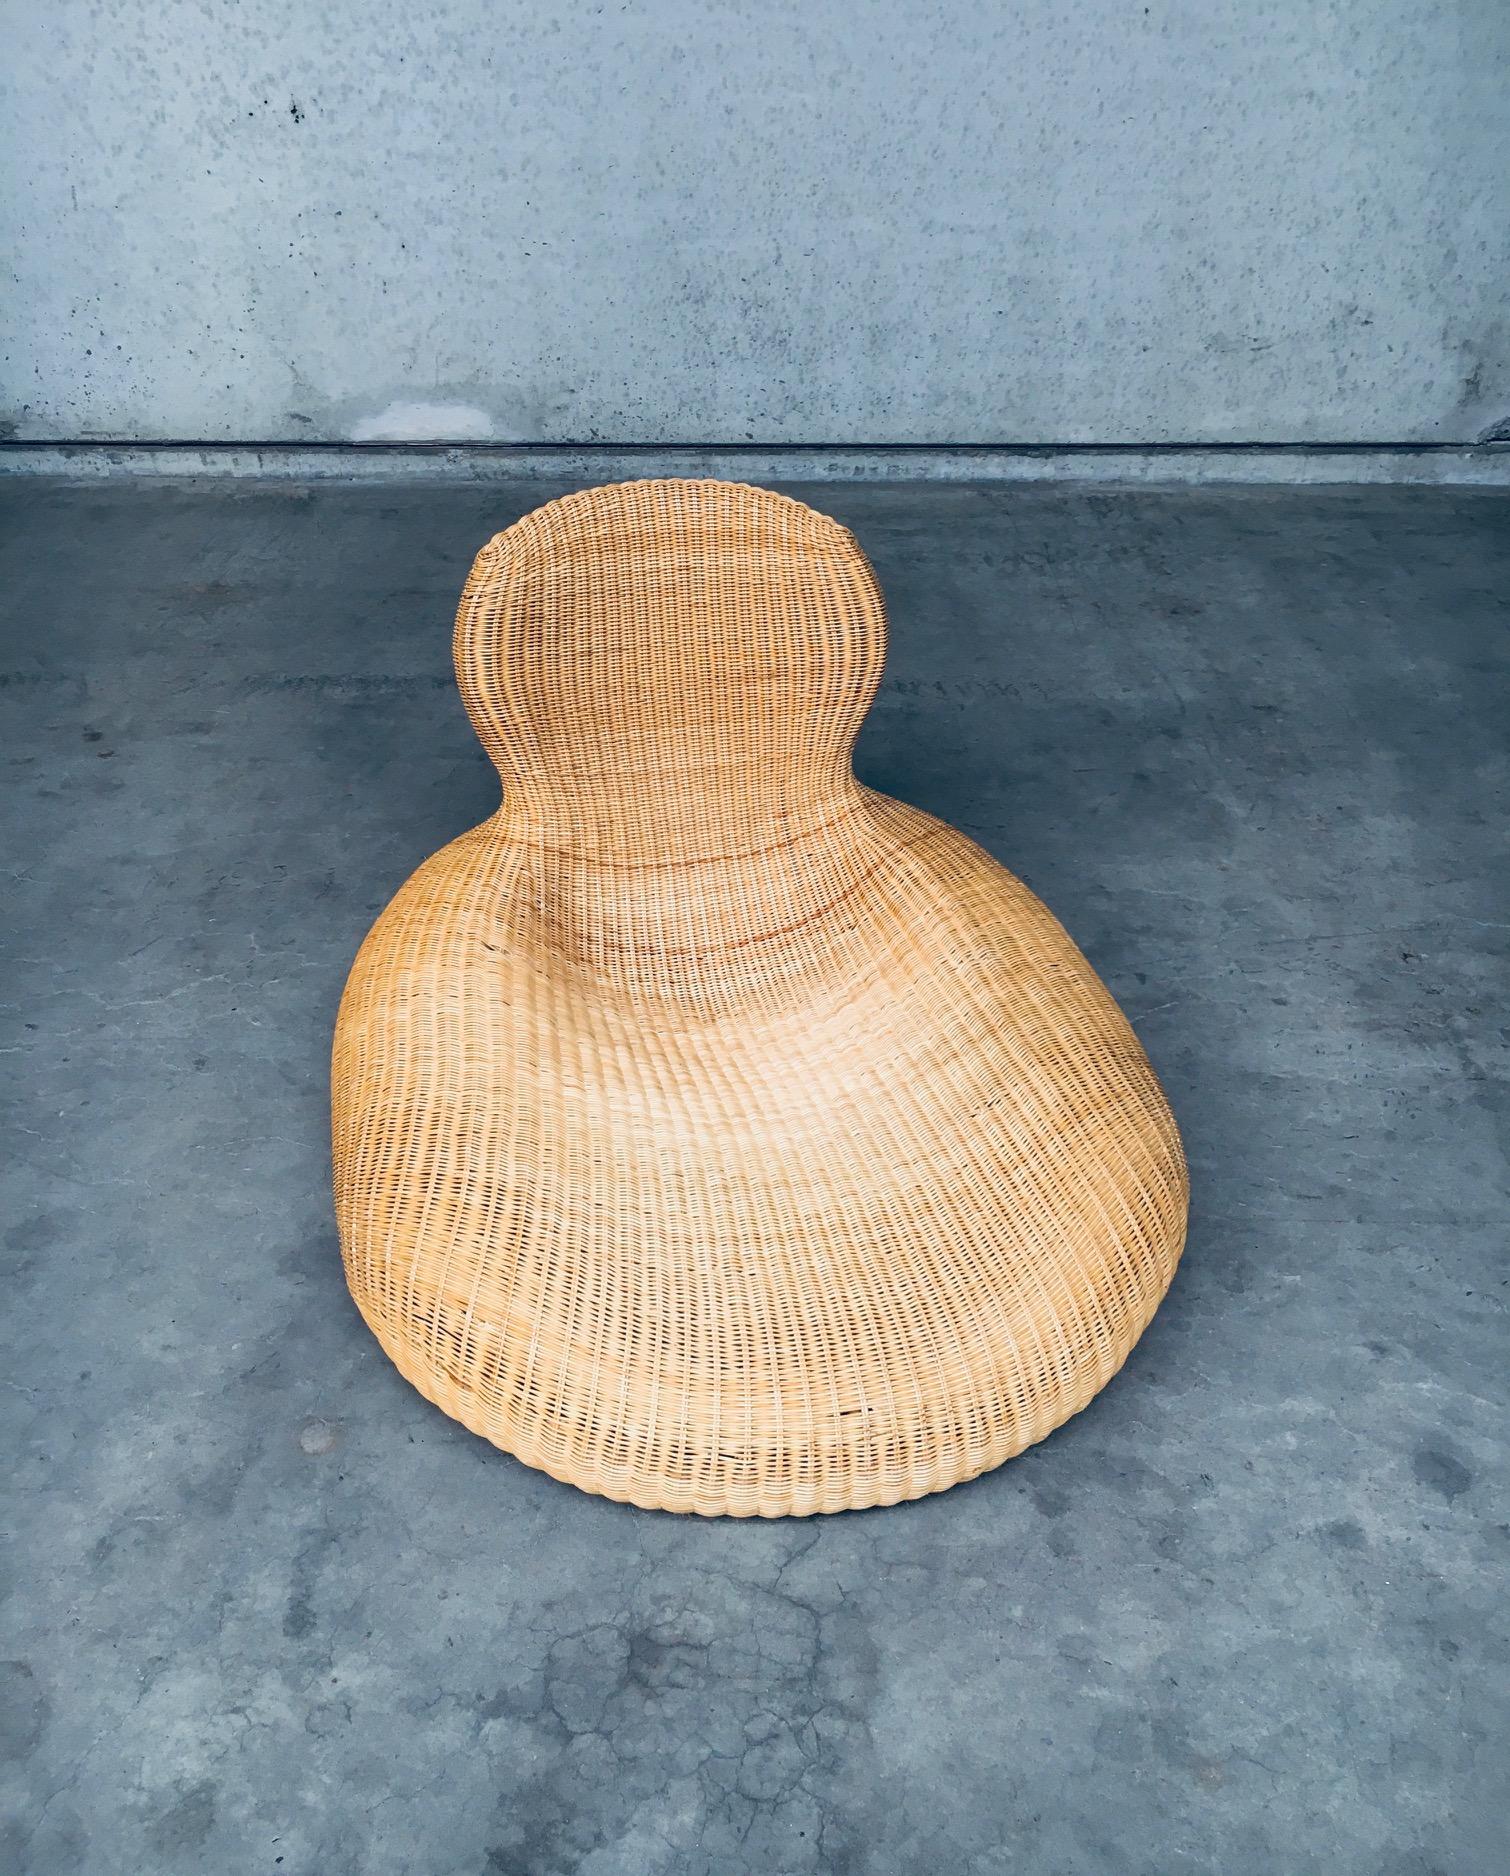 Contemporary Rattan STORVIK Lounge Chair by Carl Ojerstam for Ikea, 2000's